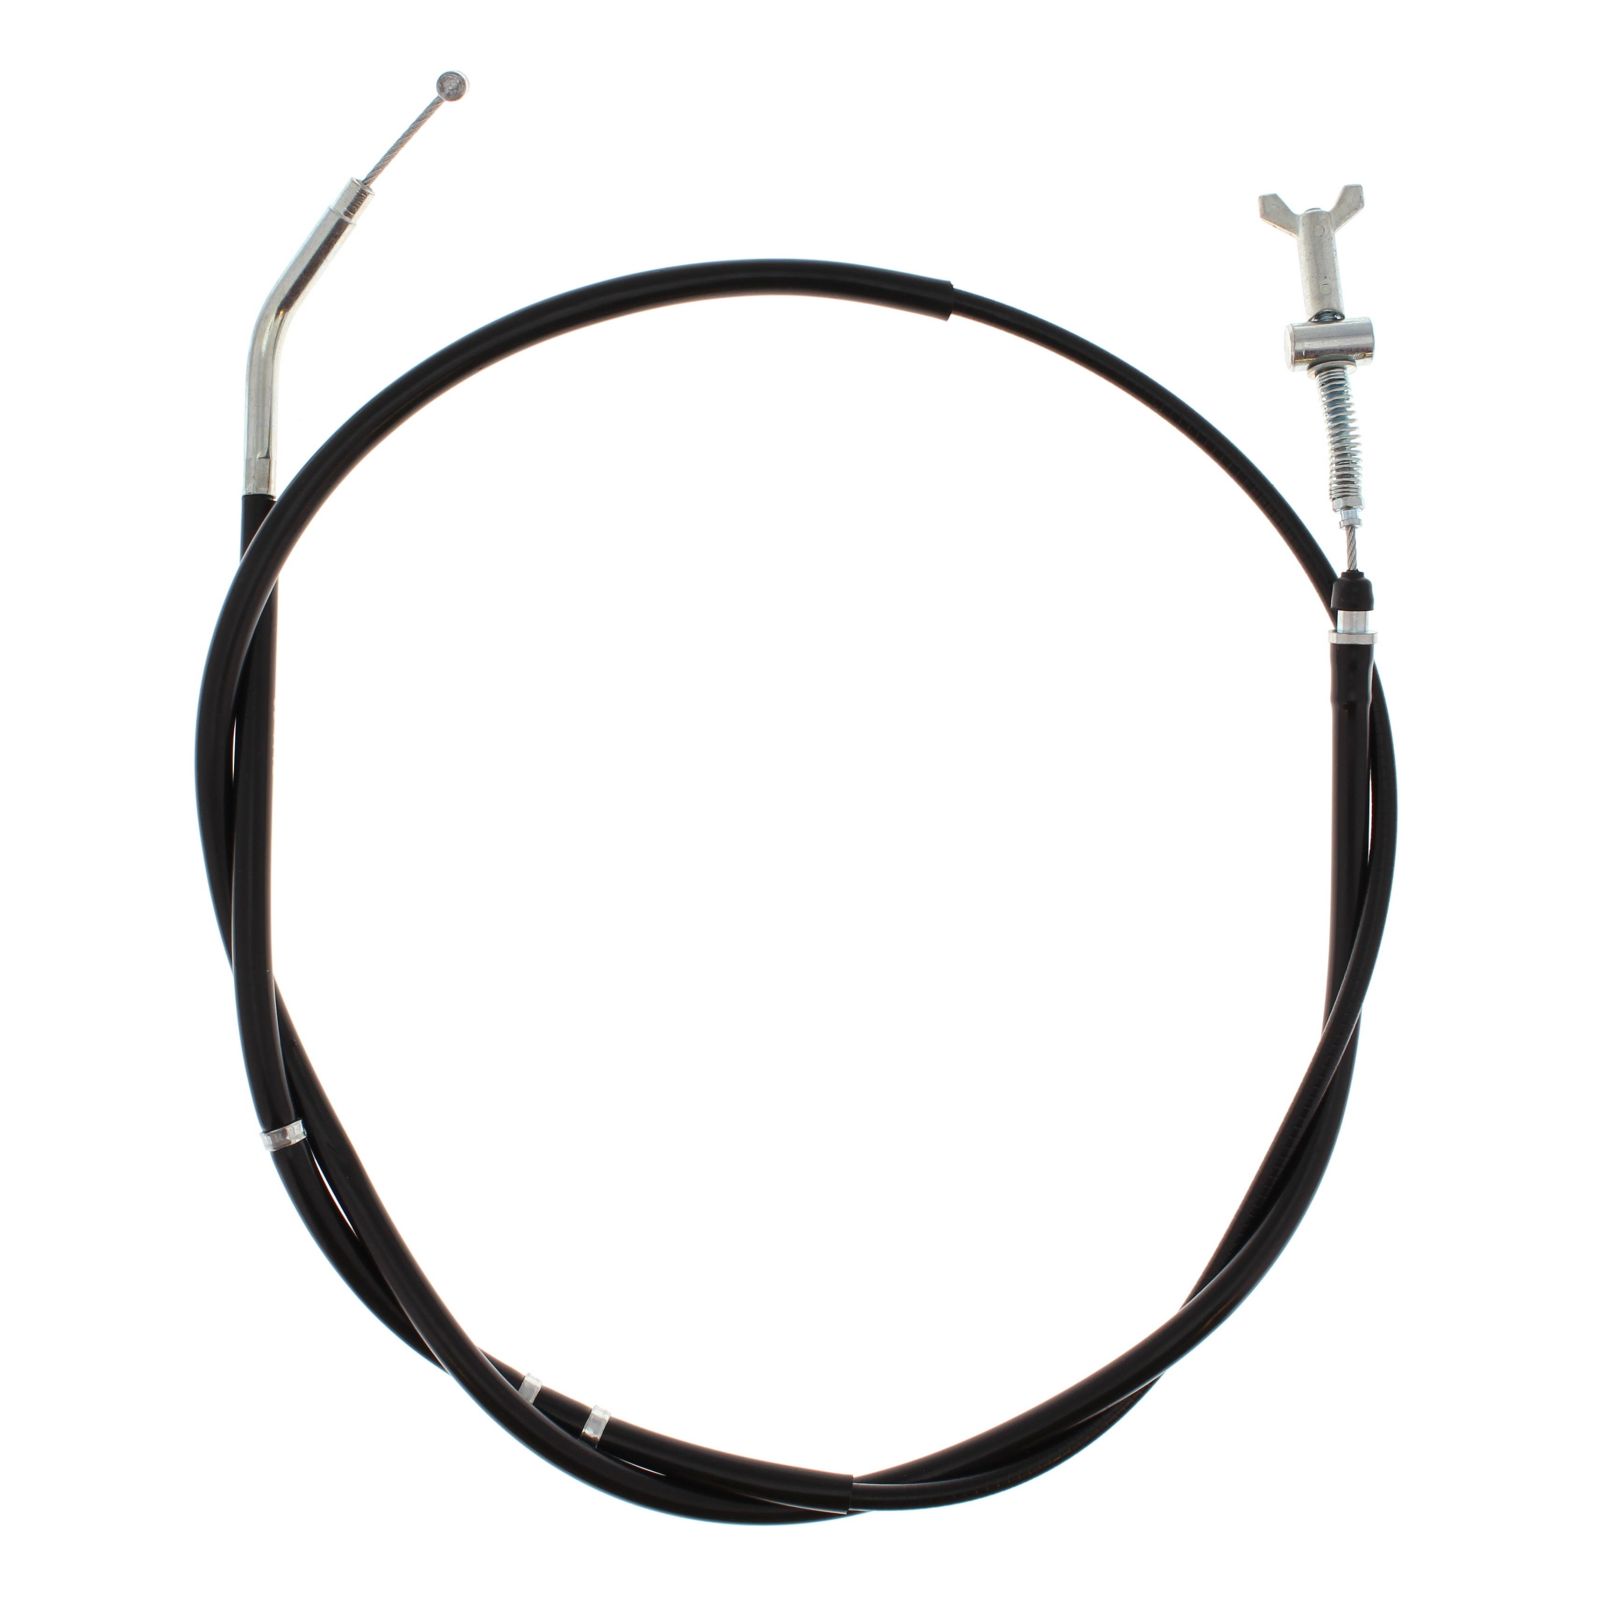 Wrp Brake Cables - WRP454032 image